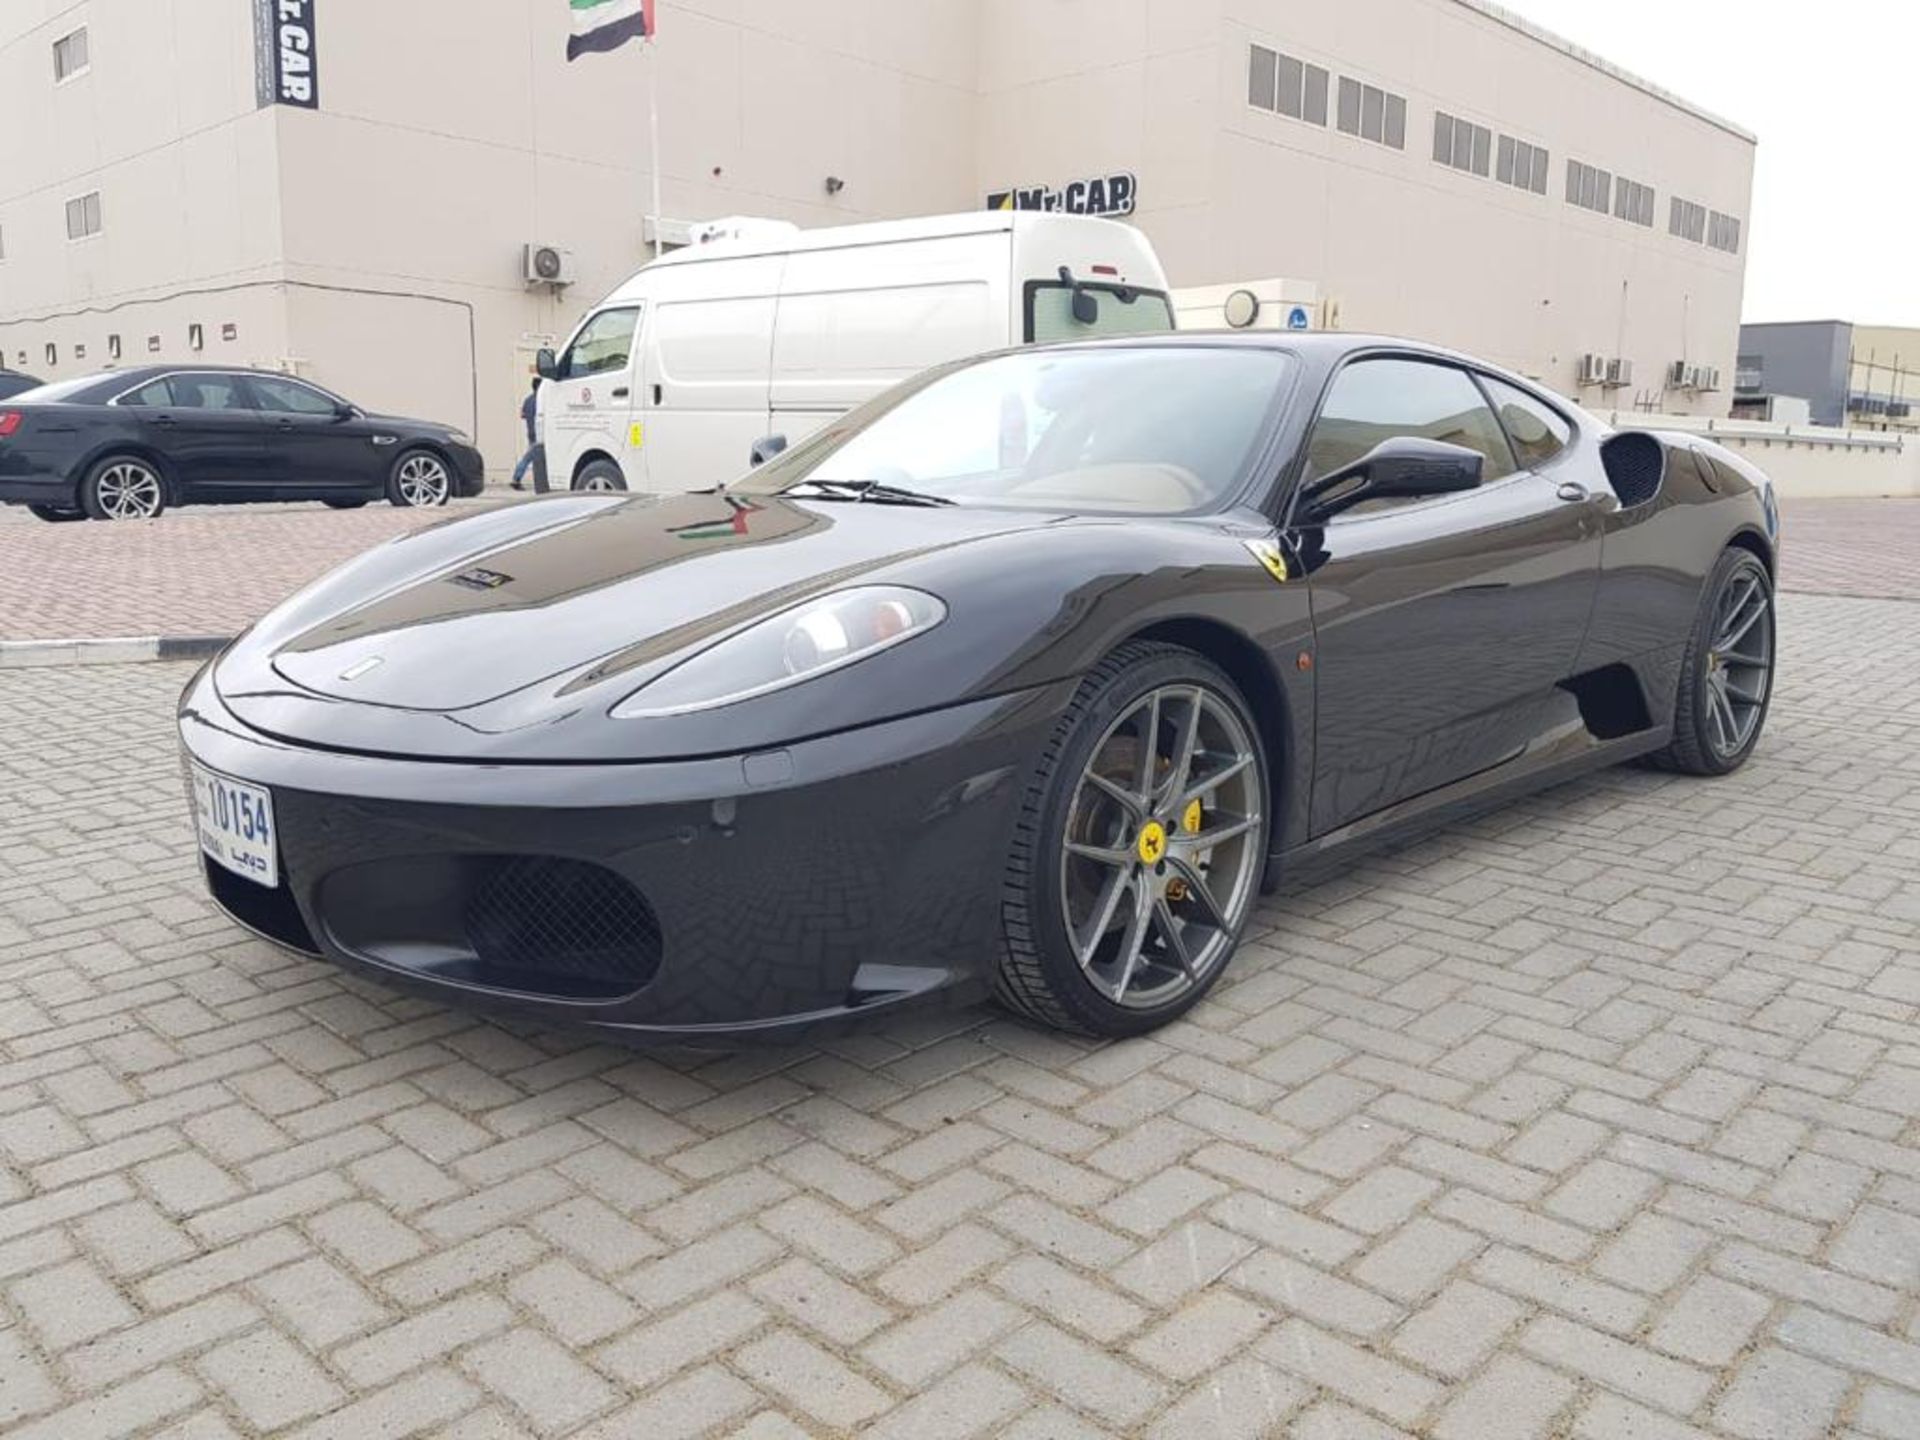 2007 FERRARI F430 BLACK 2 DOOR COUPE 4.3L AUTOMATIC LHD, PERFECT CONDITION INSIDE AND OUT - Image 3 of 13